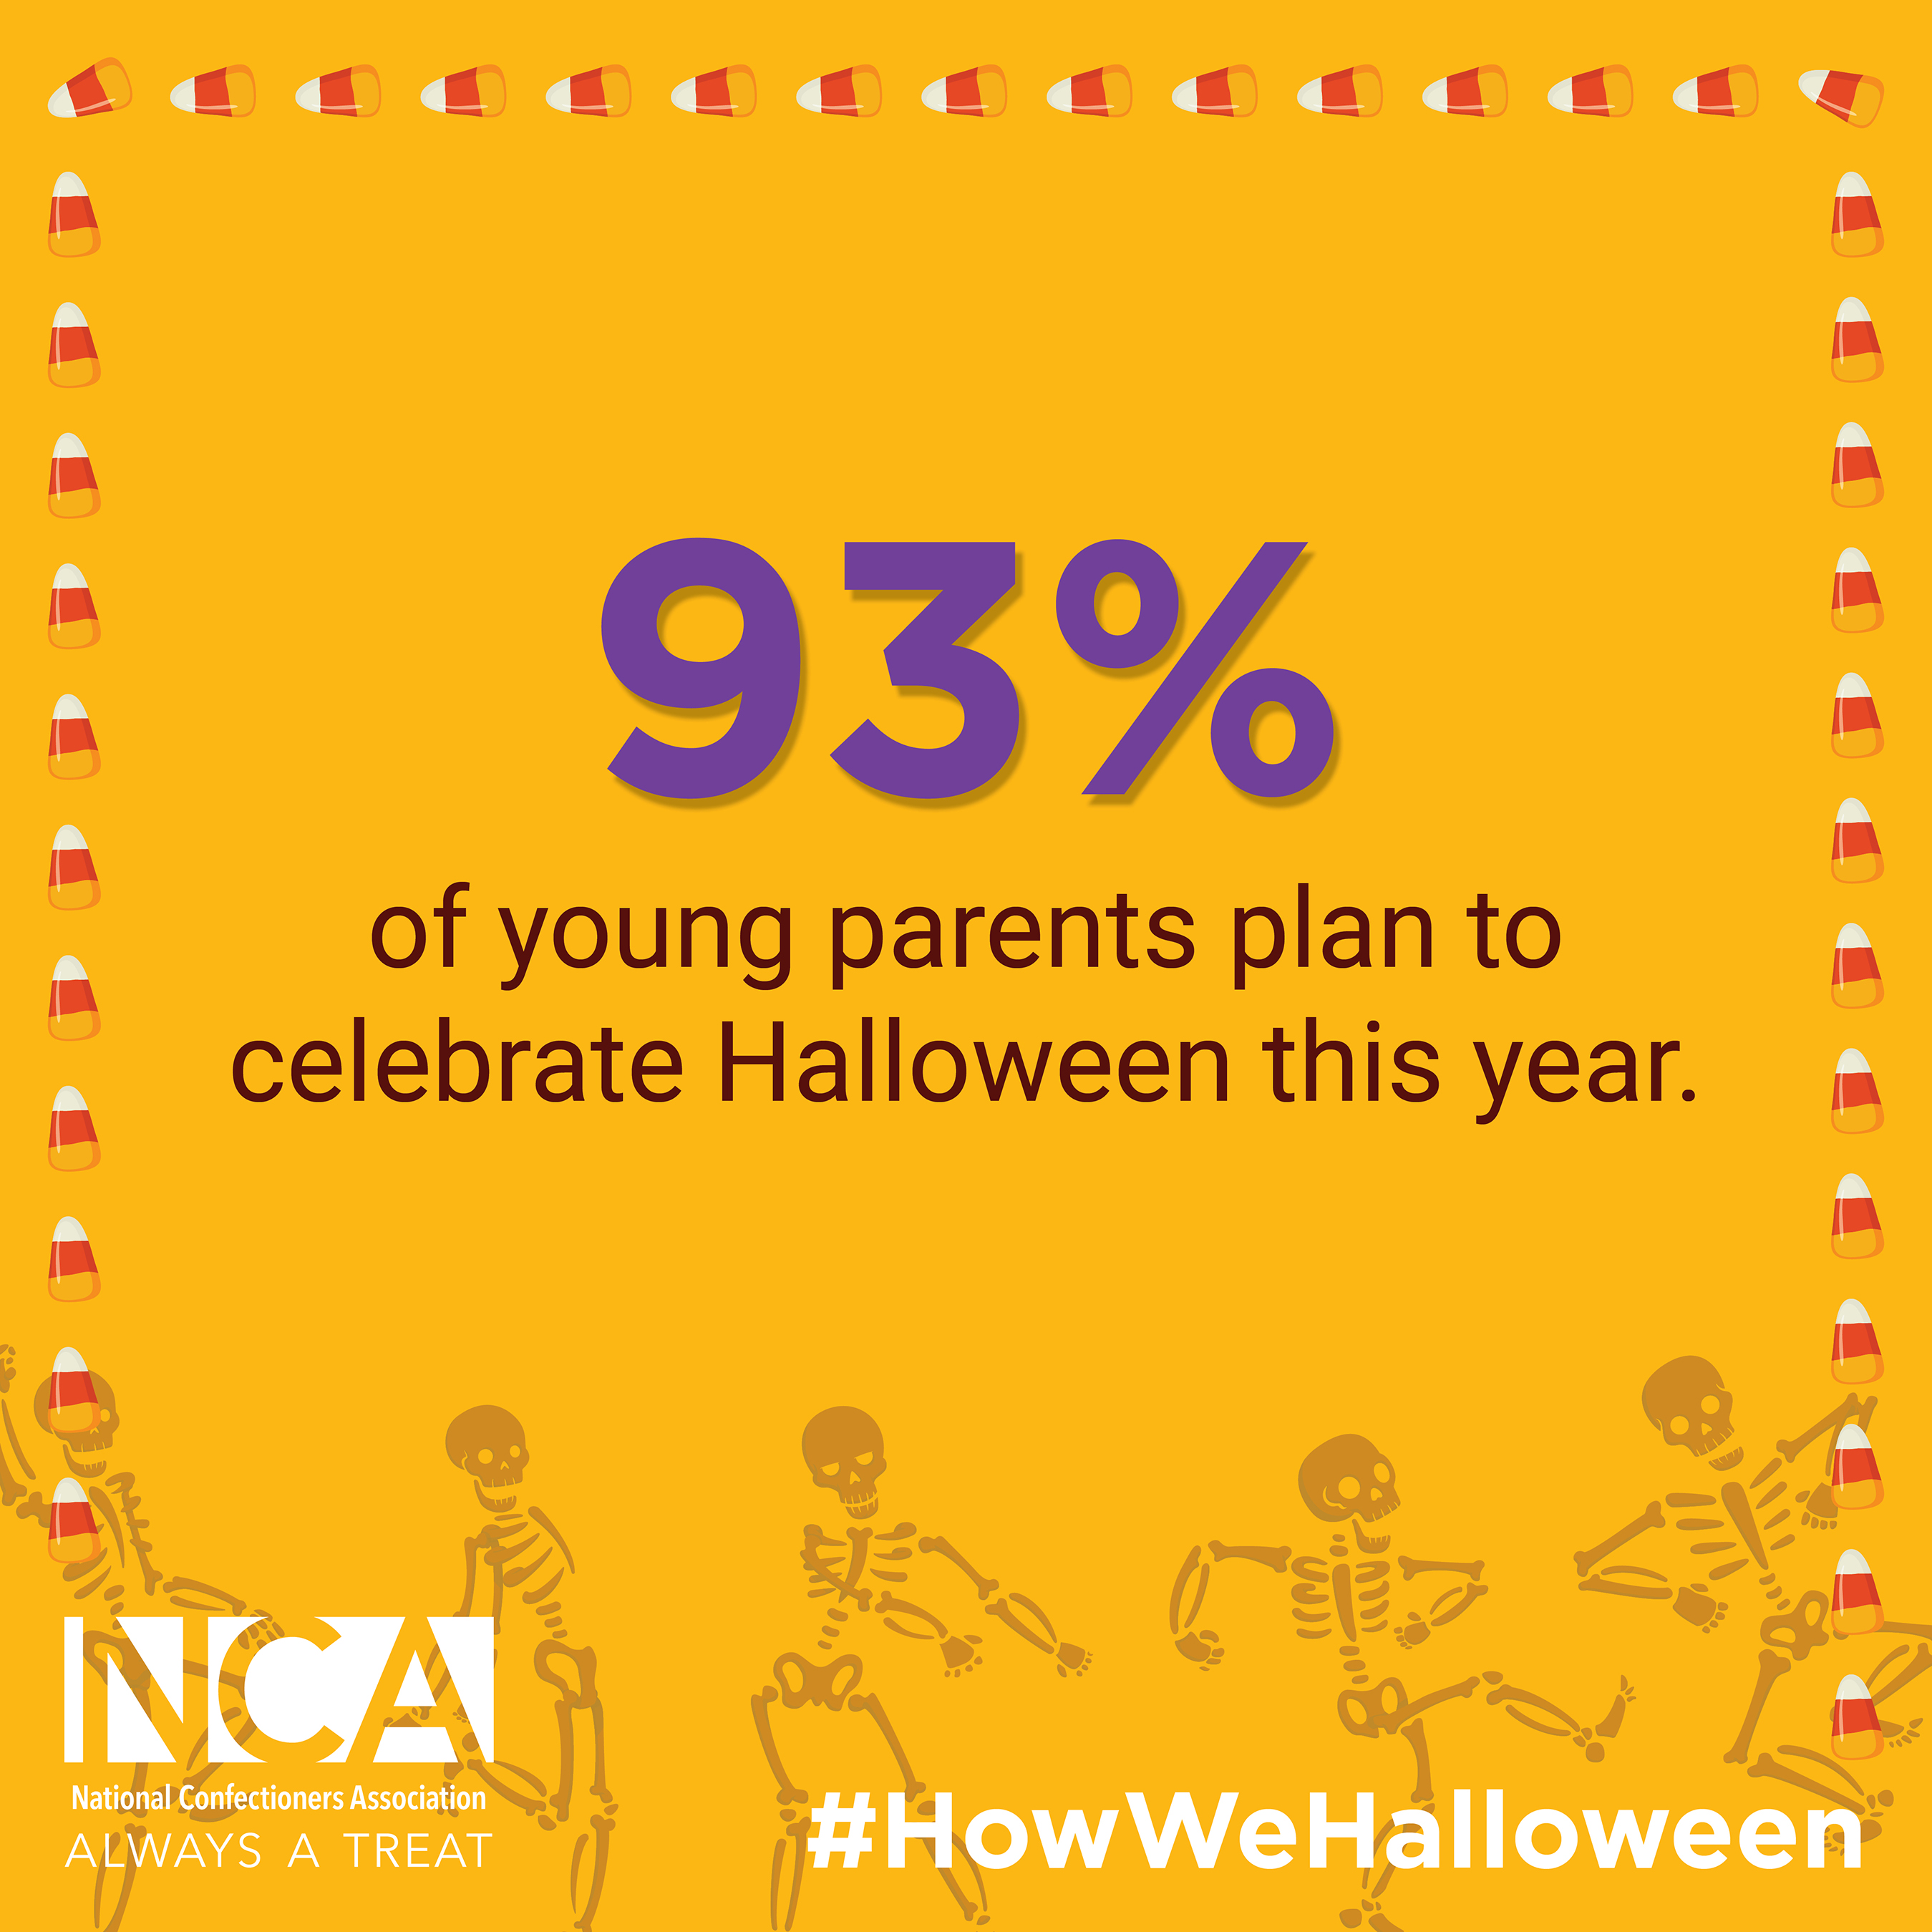 93% of young parents plan to celebrate Halloween this year.